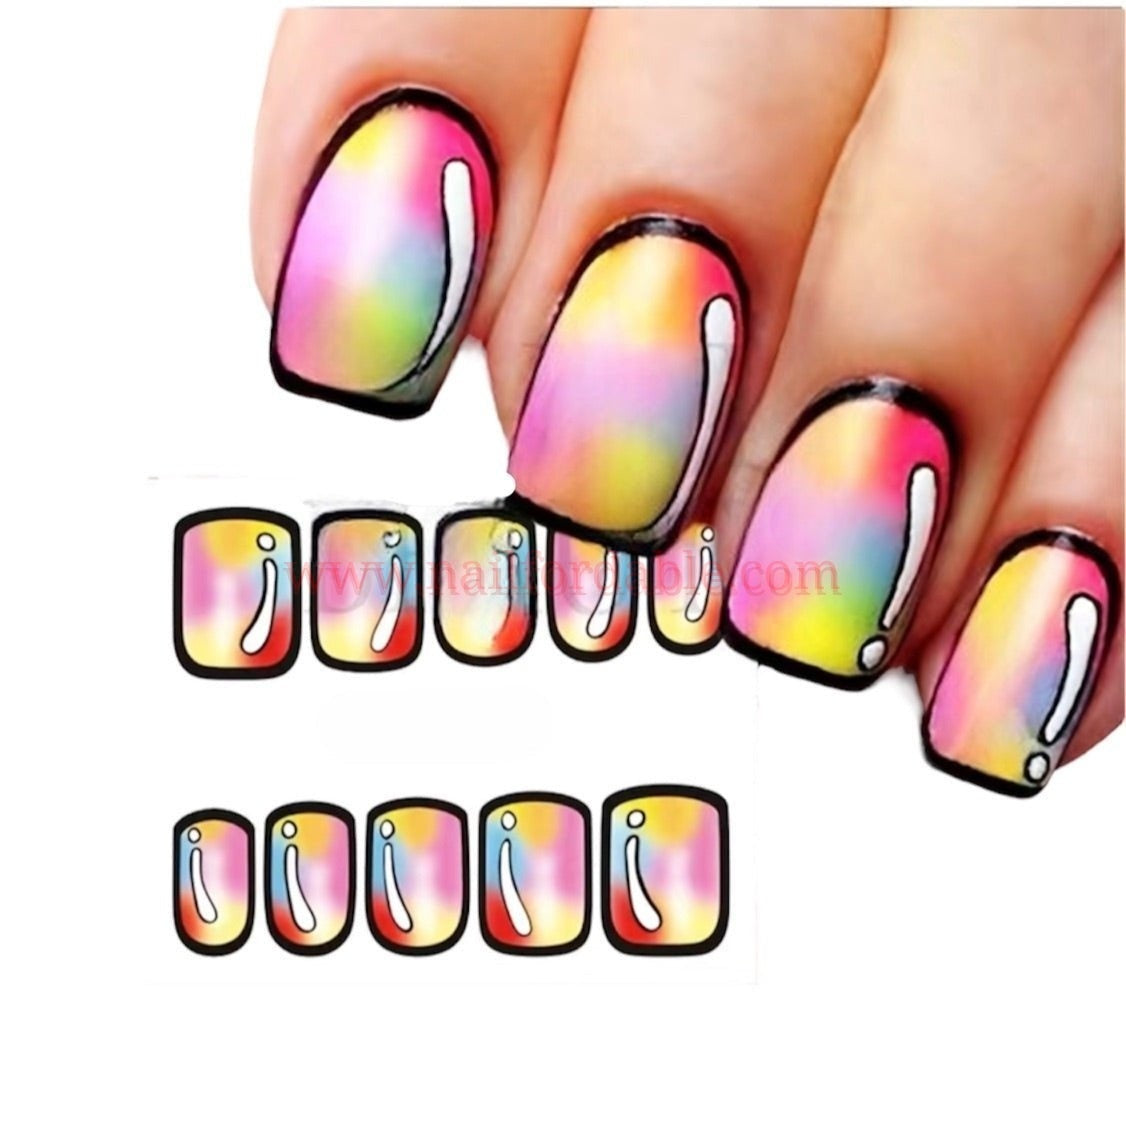 Exclamation water decal Nail Wraps | Semi Cured Gel Wraps | Gel Nail Wraps |Nail Polish | Nail Stickers